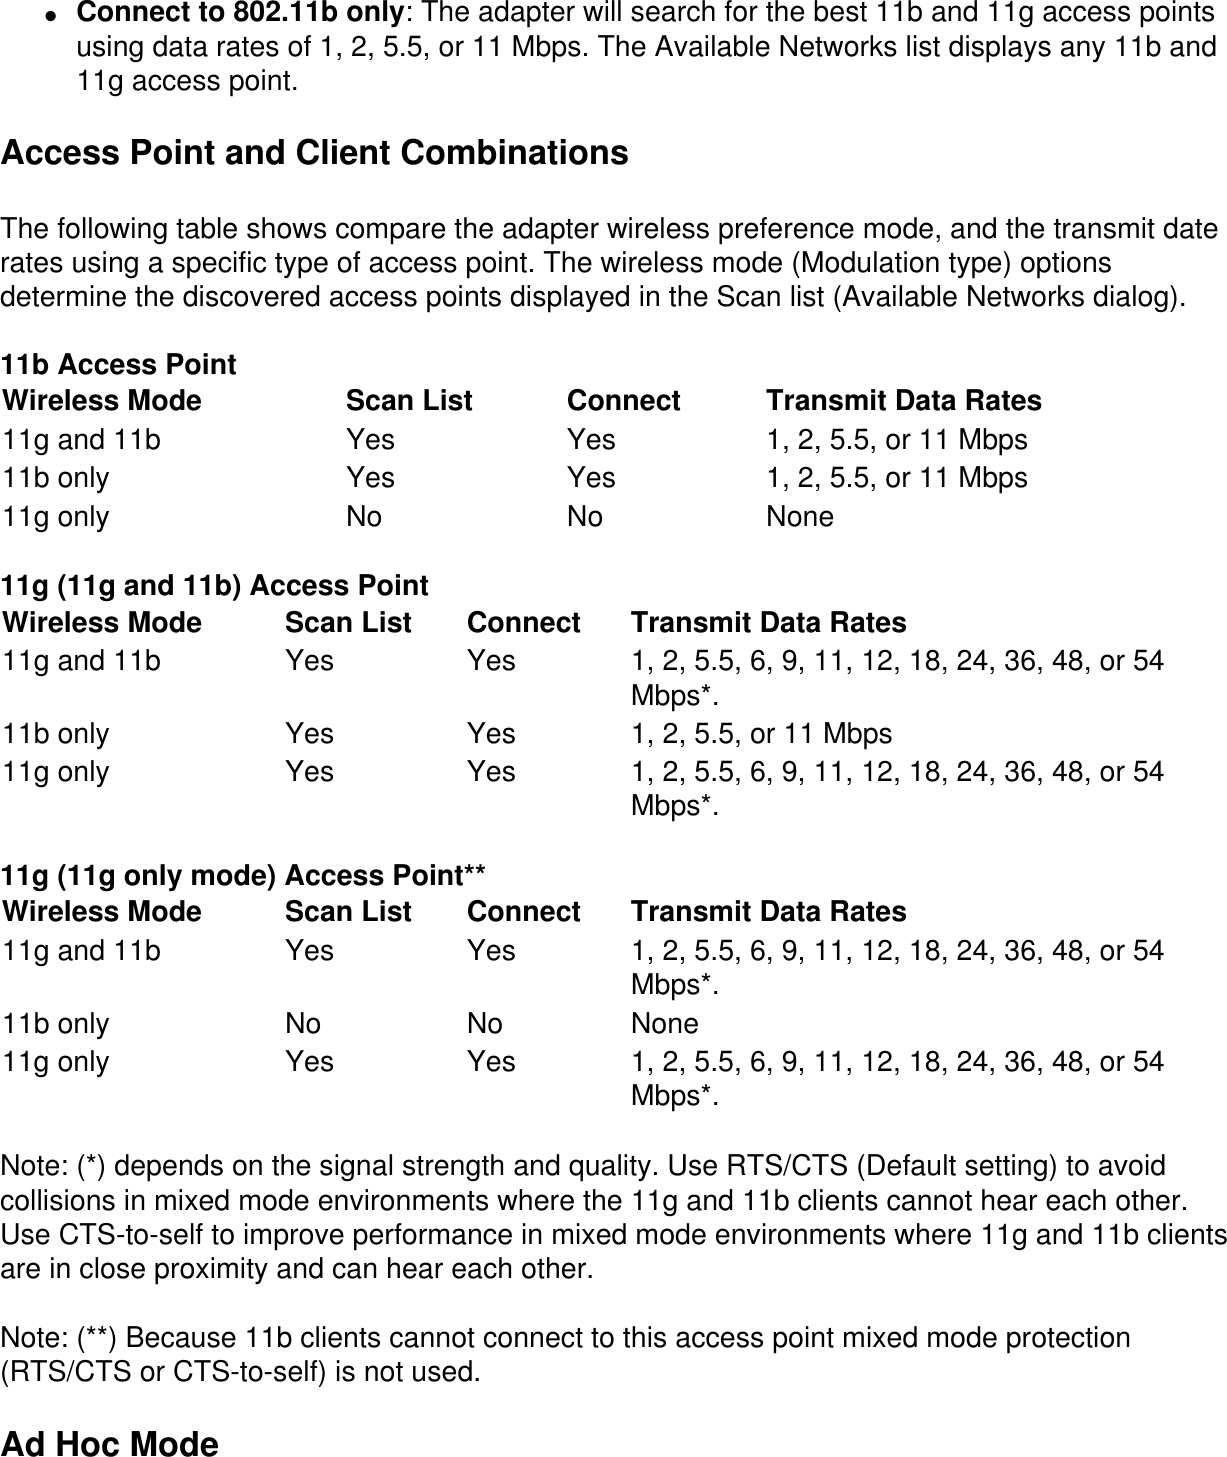 ●     Connect to 802.11b only: The adapter will search for the best 11b and 11g access points using data rates of 1, 2, 5.5, or 11 Mbps. The Available Networks list displays any 11b and 11g access point.Access Point and Client CombinationsThe following table shows compare the adapter wireless preference mode, and the transmit date rates using a specific type of access point. The wireless mode (Modulation type) options determine the discovered access points displayed in the Scan list (Available Networks dialog). 11b Access PointWireless Mode Scan List Connect Transmit Data Rates11g and 11b Yes Yes 1, 2, 5.5, or 11 Mbps11b only Yes Yes 1, 2, 5.5, or 11 Mbps11g only No No None 11g (11g and 11b) Access PointWireless Mode Scan List Connect Transmit Data Rates11g and 11b Yes Yes 1, 2, 5.5, 6, 9, 11, 12, 18, 24, 36, 48, or 54 Mbps*. 11b only Yes Yes 1, 2, 5.5, or 11 Mbps11g only Yes Yes 1, 2, 5.5, 6, 9, 11, 12, 18, 24, 36, 48, or 54 Mbps*.  11g (11g only mode) Access Point**Wireless Mode Scan List Connect Transmit Data Rates11g and 11b Yes Yes 1, 2, 5.5, 6, 9, 11, 12, 18, 24, 36, 48, or 54 Mbps*. 11b only No No None11g only Yes Yes 1, 2, 5.5, 6, 9, 11, 12, 18, 24, 36, 48, or 54 Mbps*.  Note: (*) depends on the signal strength and quality. Use RTS/CTS (Default setting) to avoid collisions in mixed mode environments where the 11g and 11b clients cannot hear each other. Use CTS-to-self to improve performance in mixed mode environments where 11g and 11b clients are in close proximity and can hear each other. Note: (**) Because 11b clients cannot connect to this access point mixed mode protection (RTS/CTS or CTS-to-self) is not used.Ad Hoc Mode